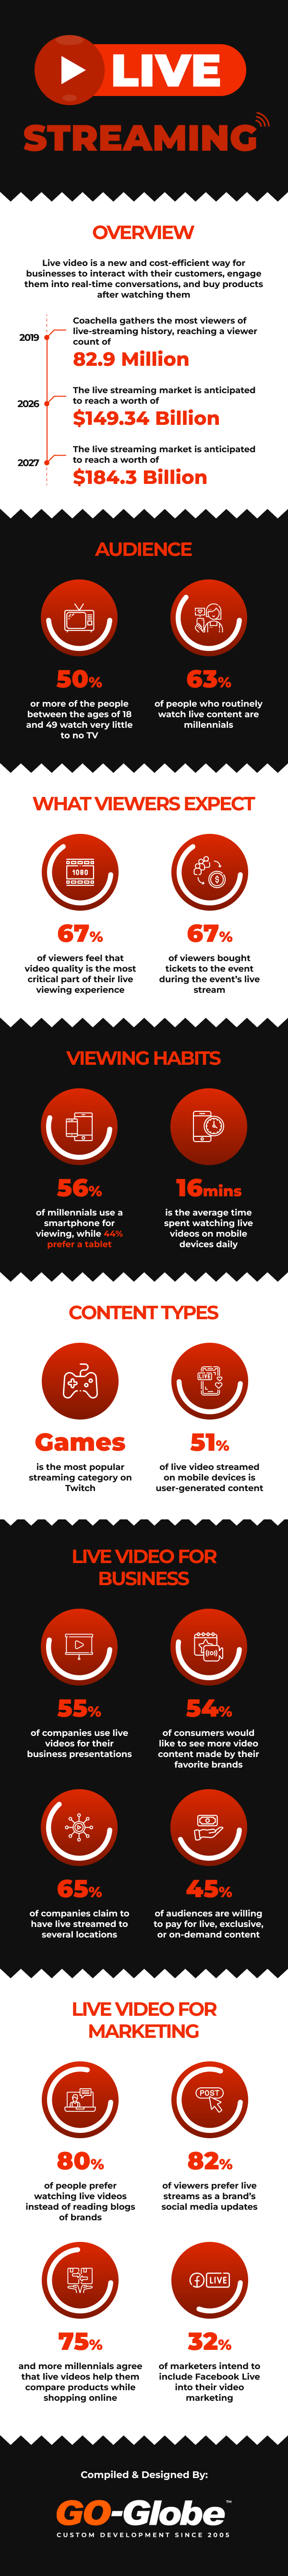 Interesting Live-Streaming Facts and Trends